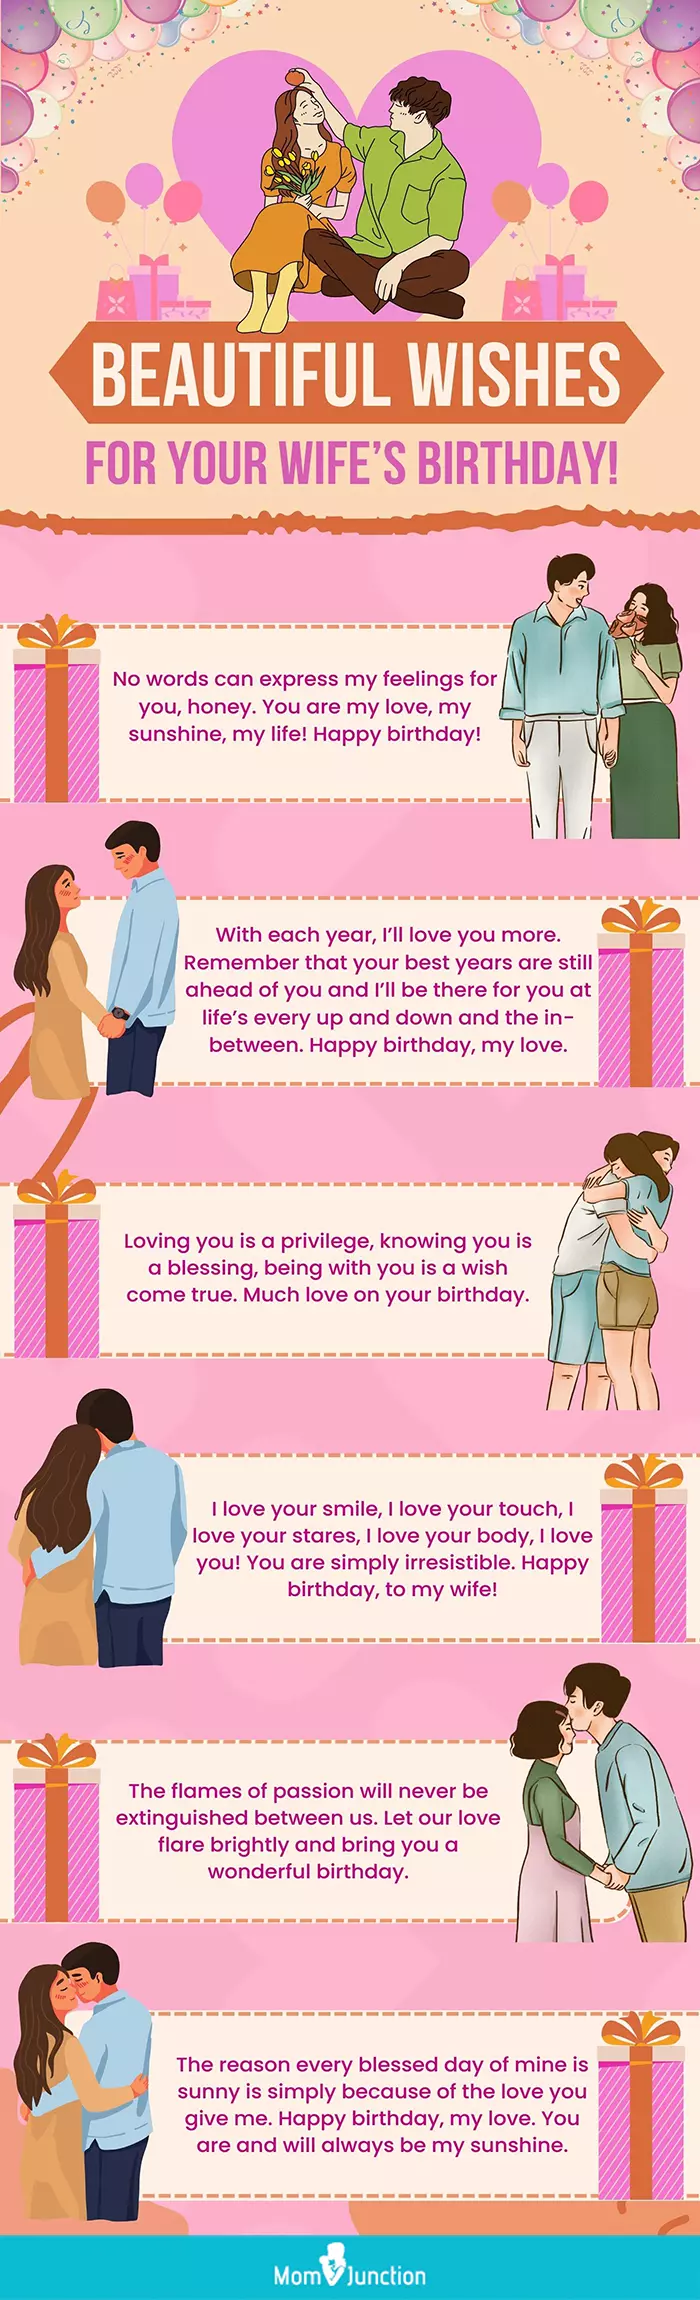 beautiful wishes for your wifes special day (infographic)